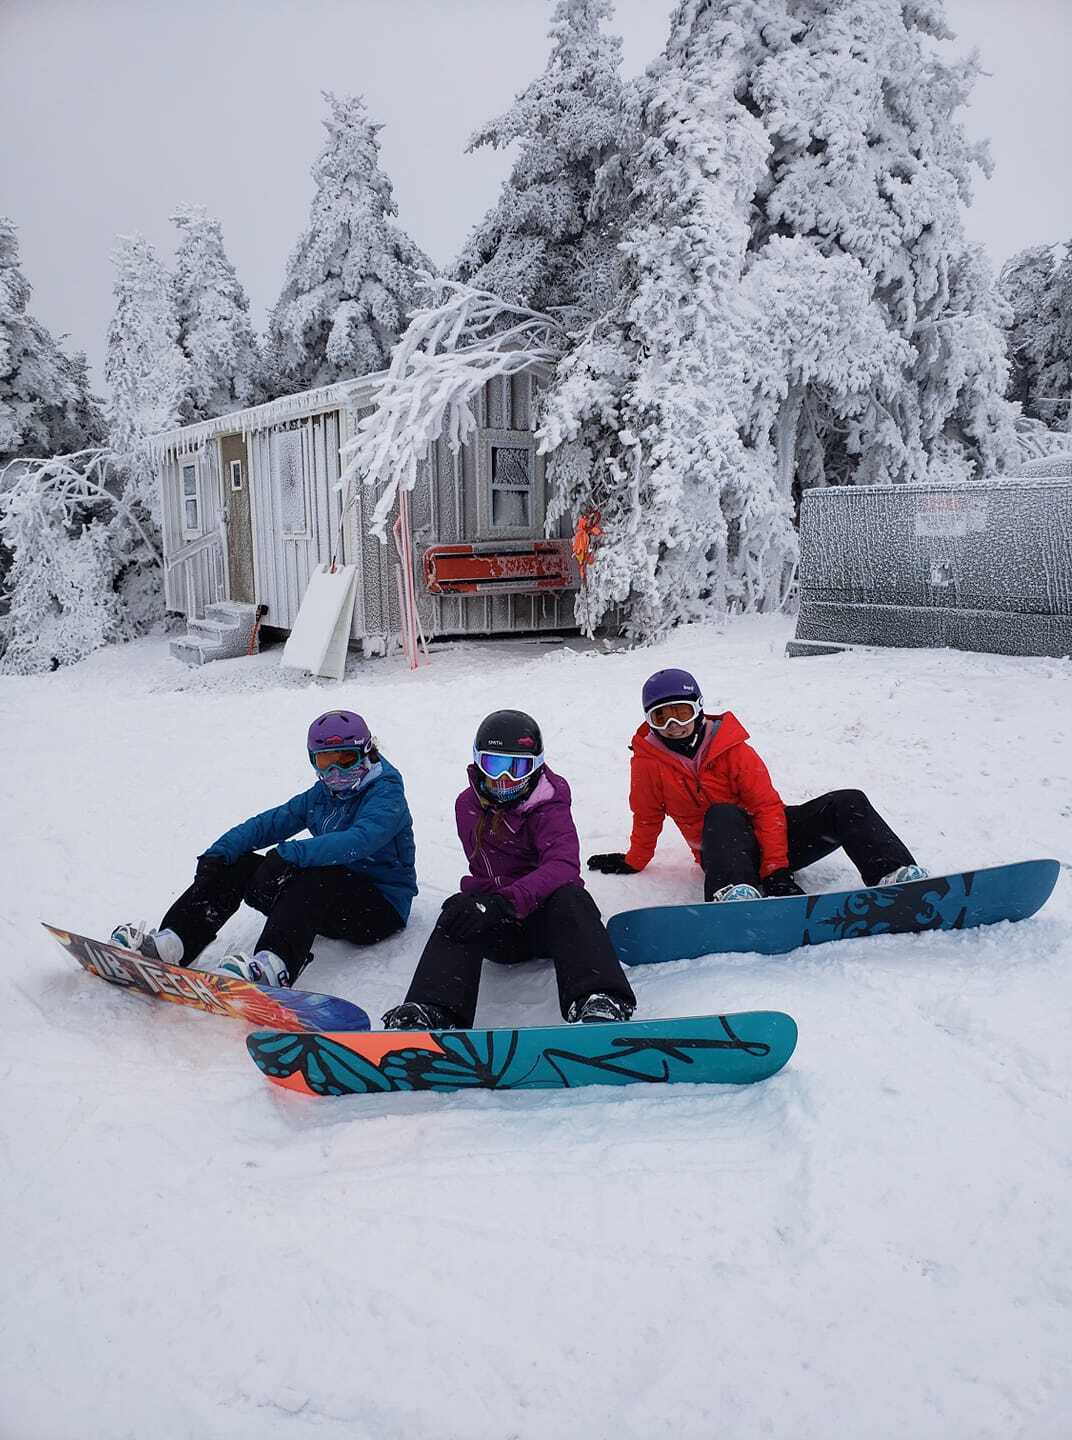 The best ski resorts in Vermont, where white-slopes give you a fabulous winter vacation